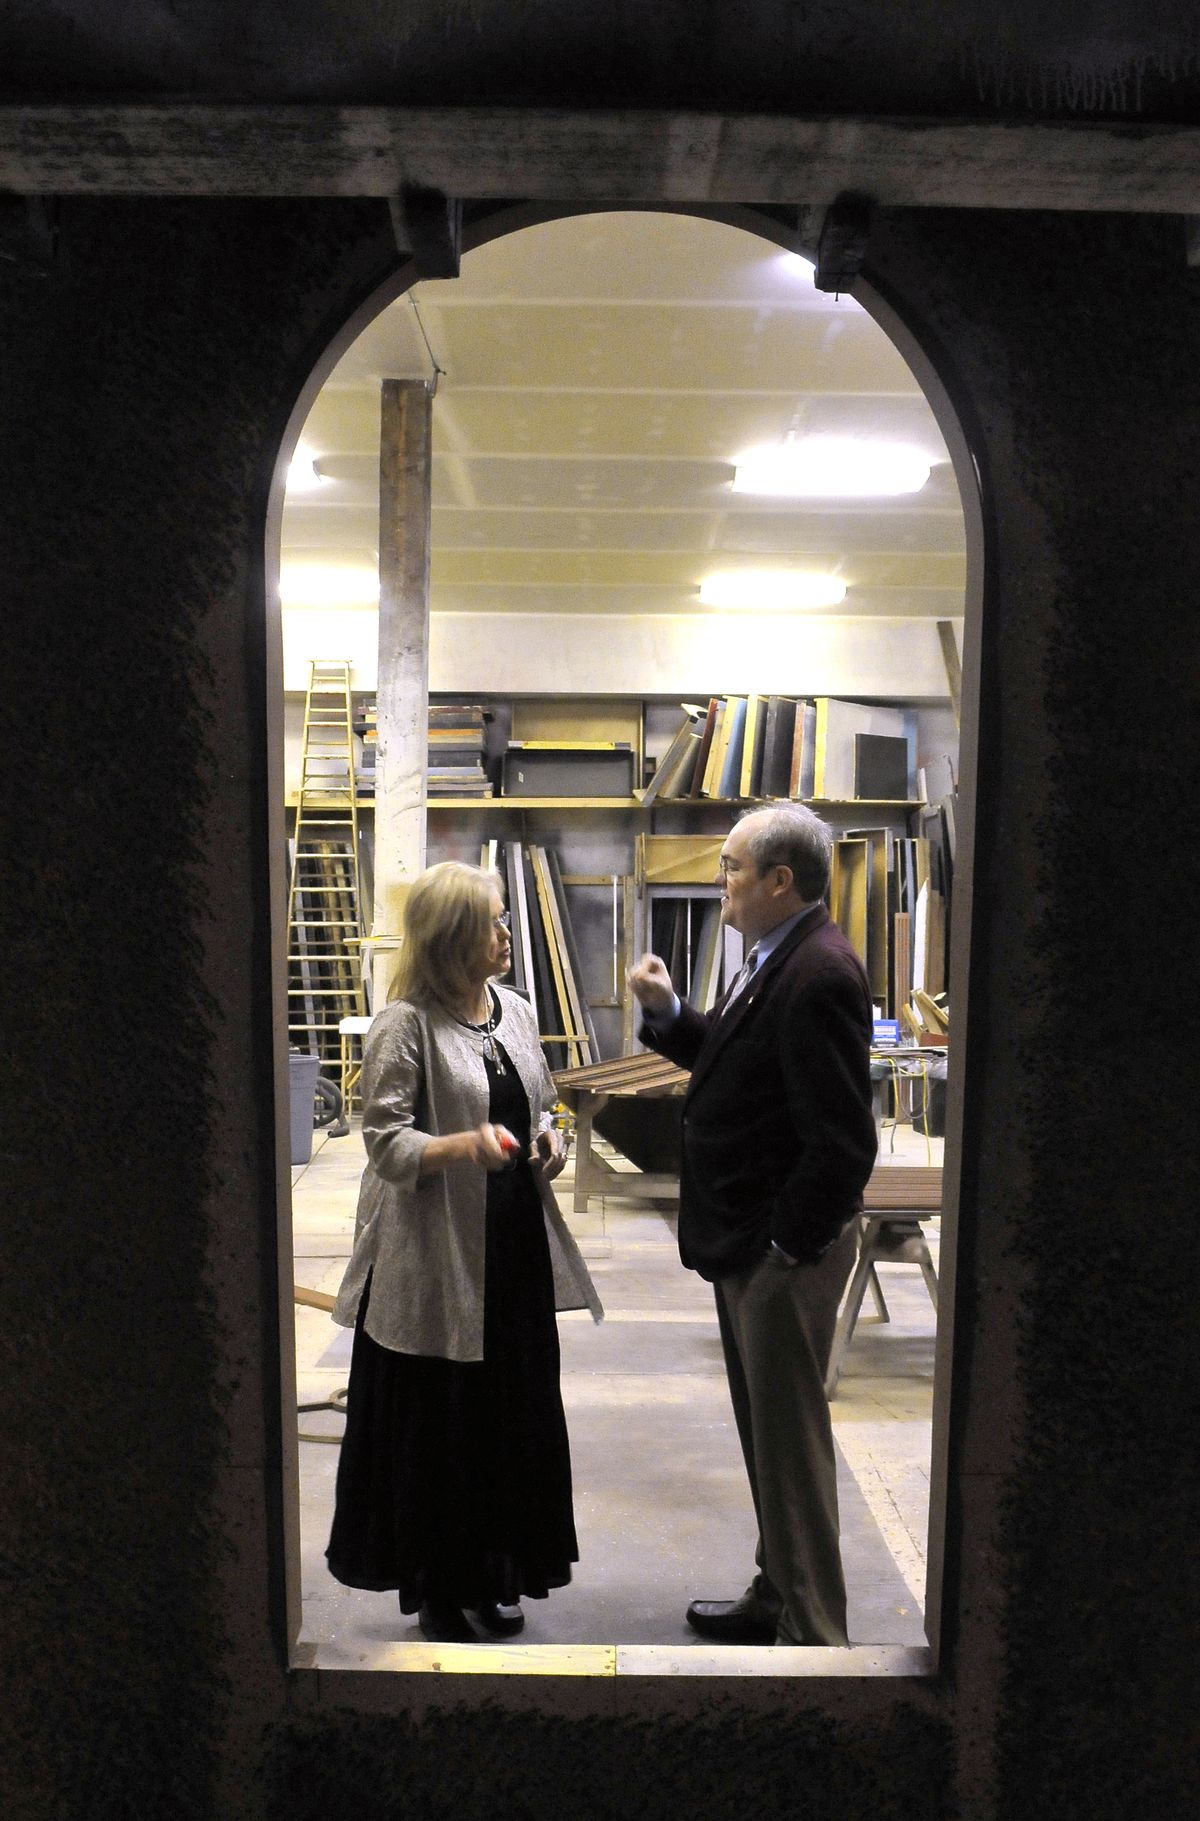 Spokane Interplayers Ensemble managers Pamela Brown and Reed McColm chat in the back shop where sets are built in the 1920s-vintage building on Friday. (Jesse Tinsley)